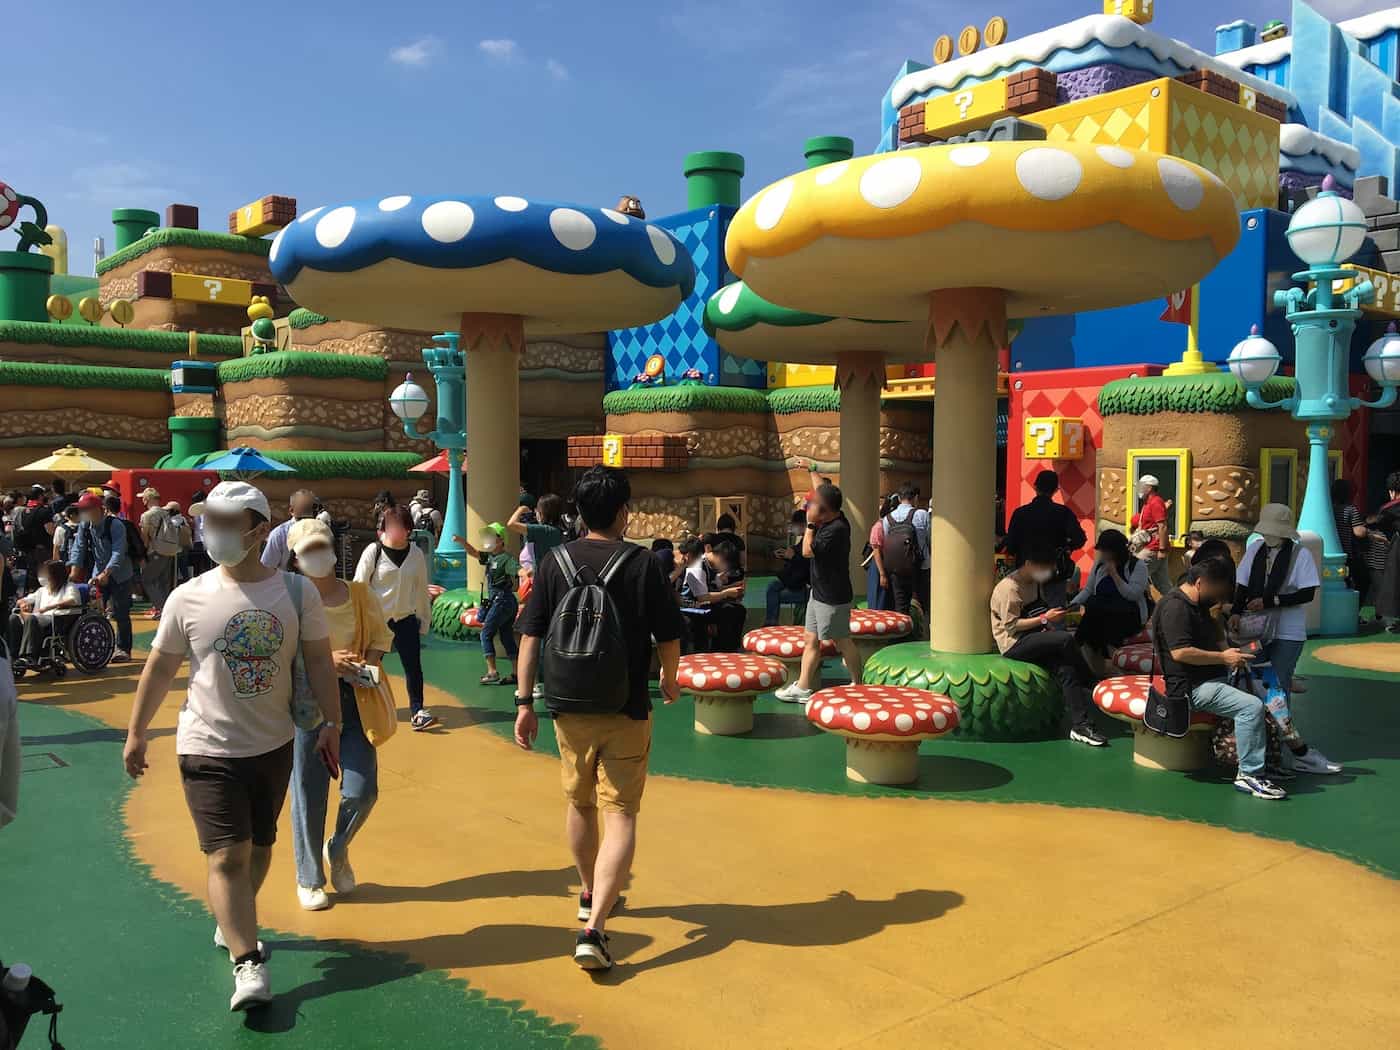 Visitors relaxing under the shade of giant mushroom structures at Super Nintendo World.